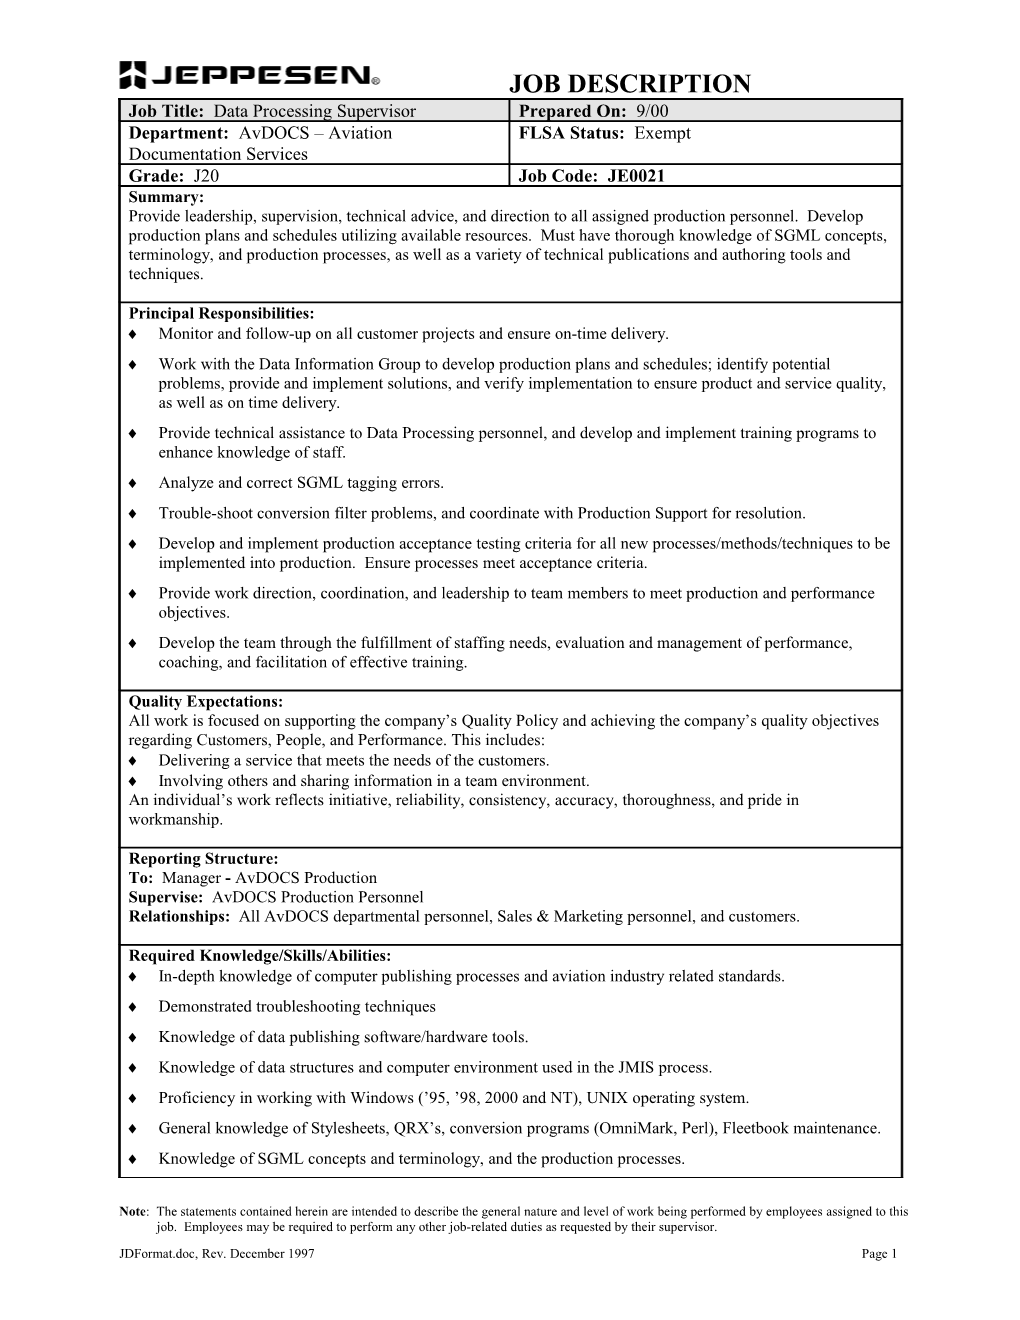 Education/Experience Requirements